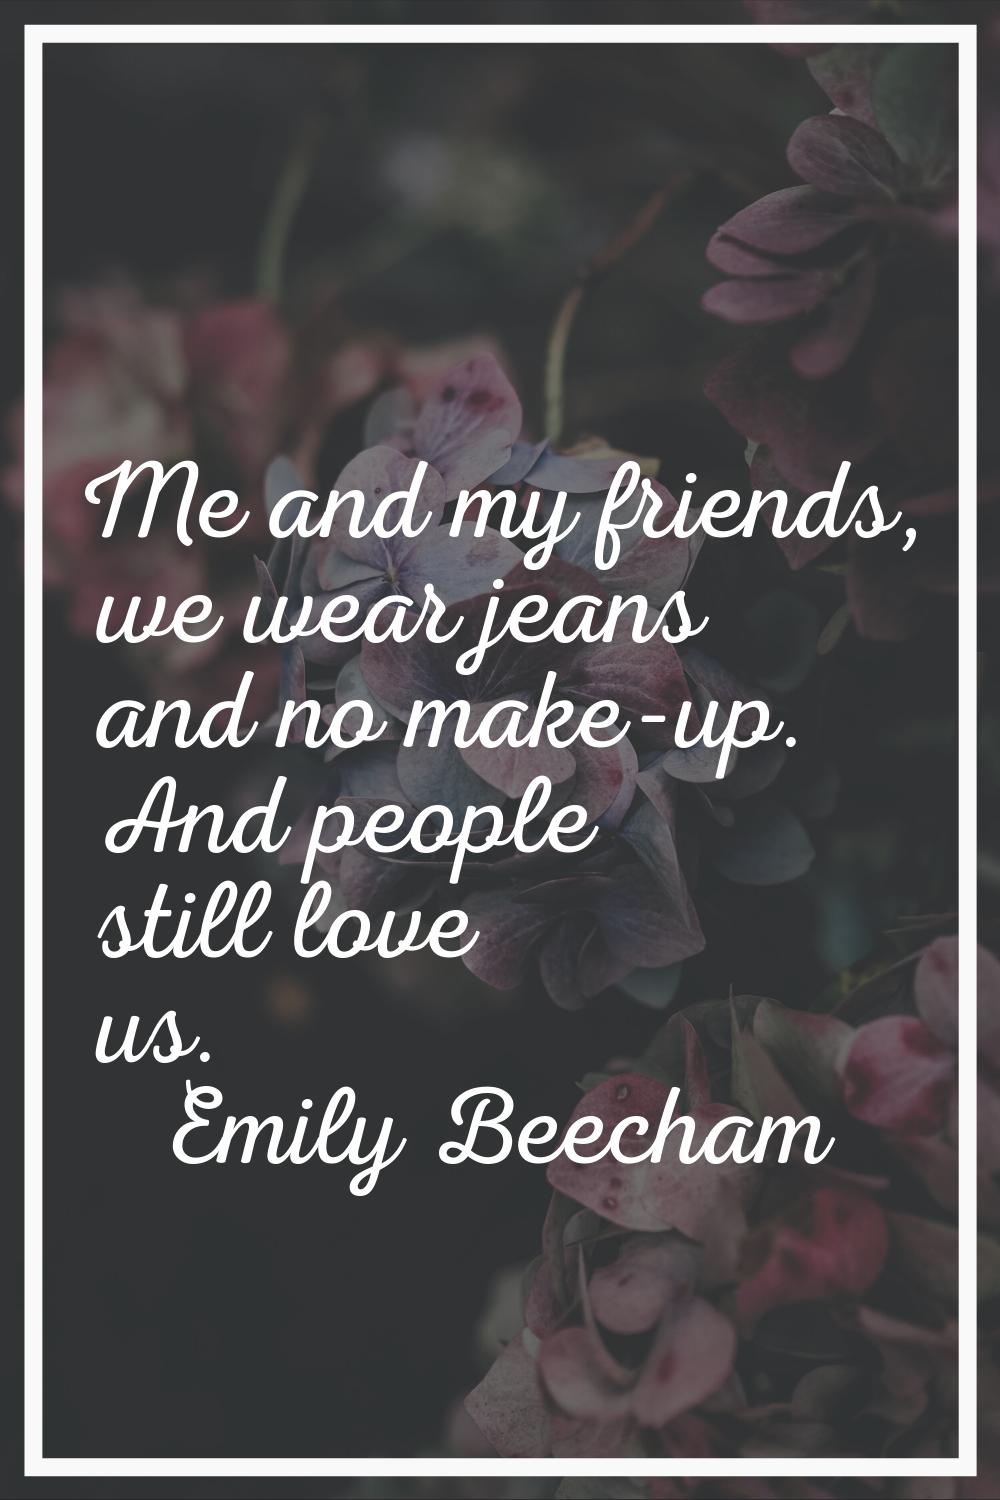 Me and my friends, we wear jeans and no make-up. And people still love us.